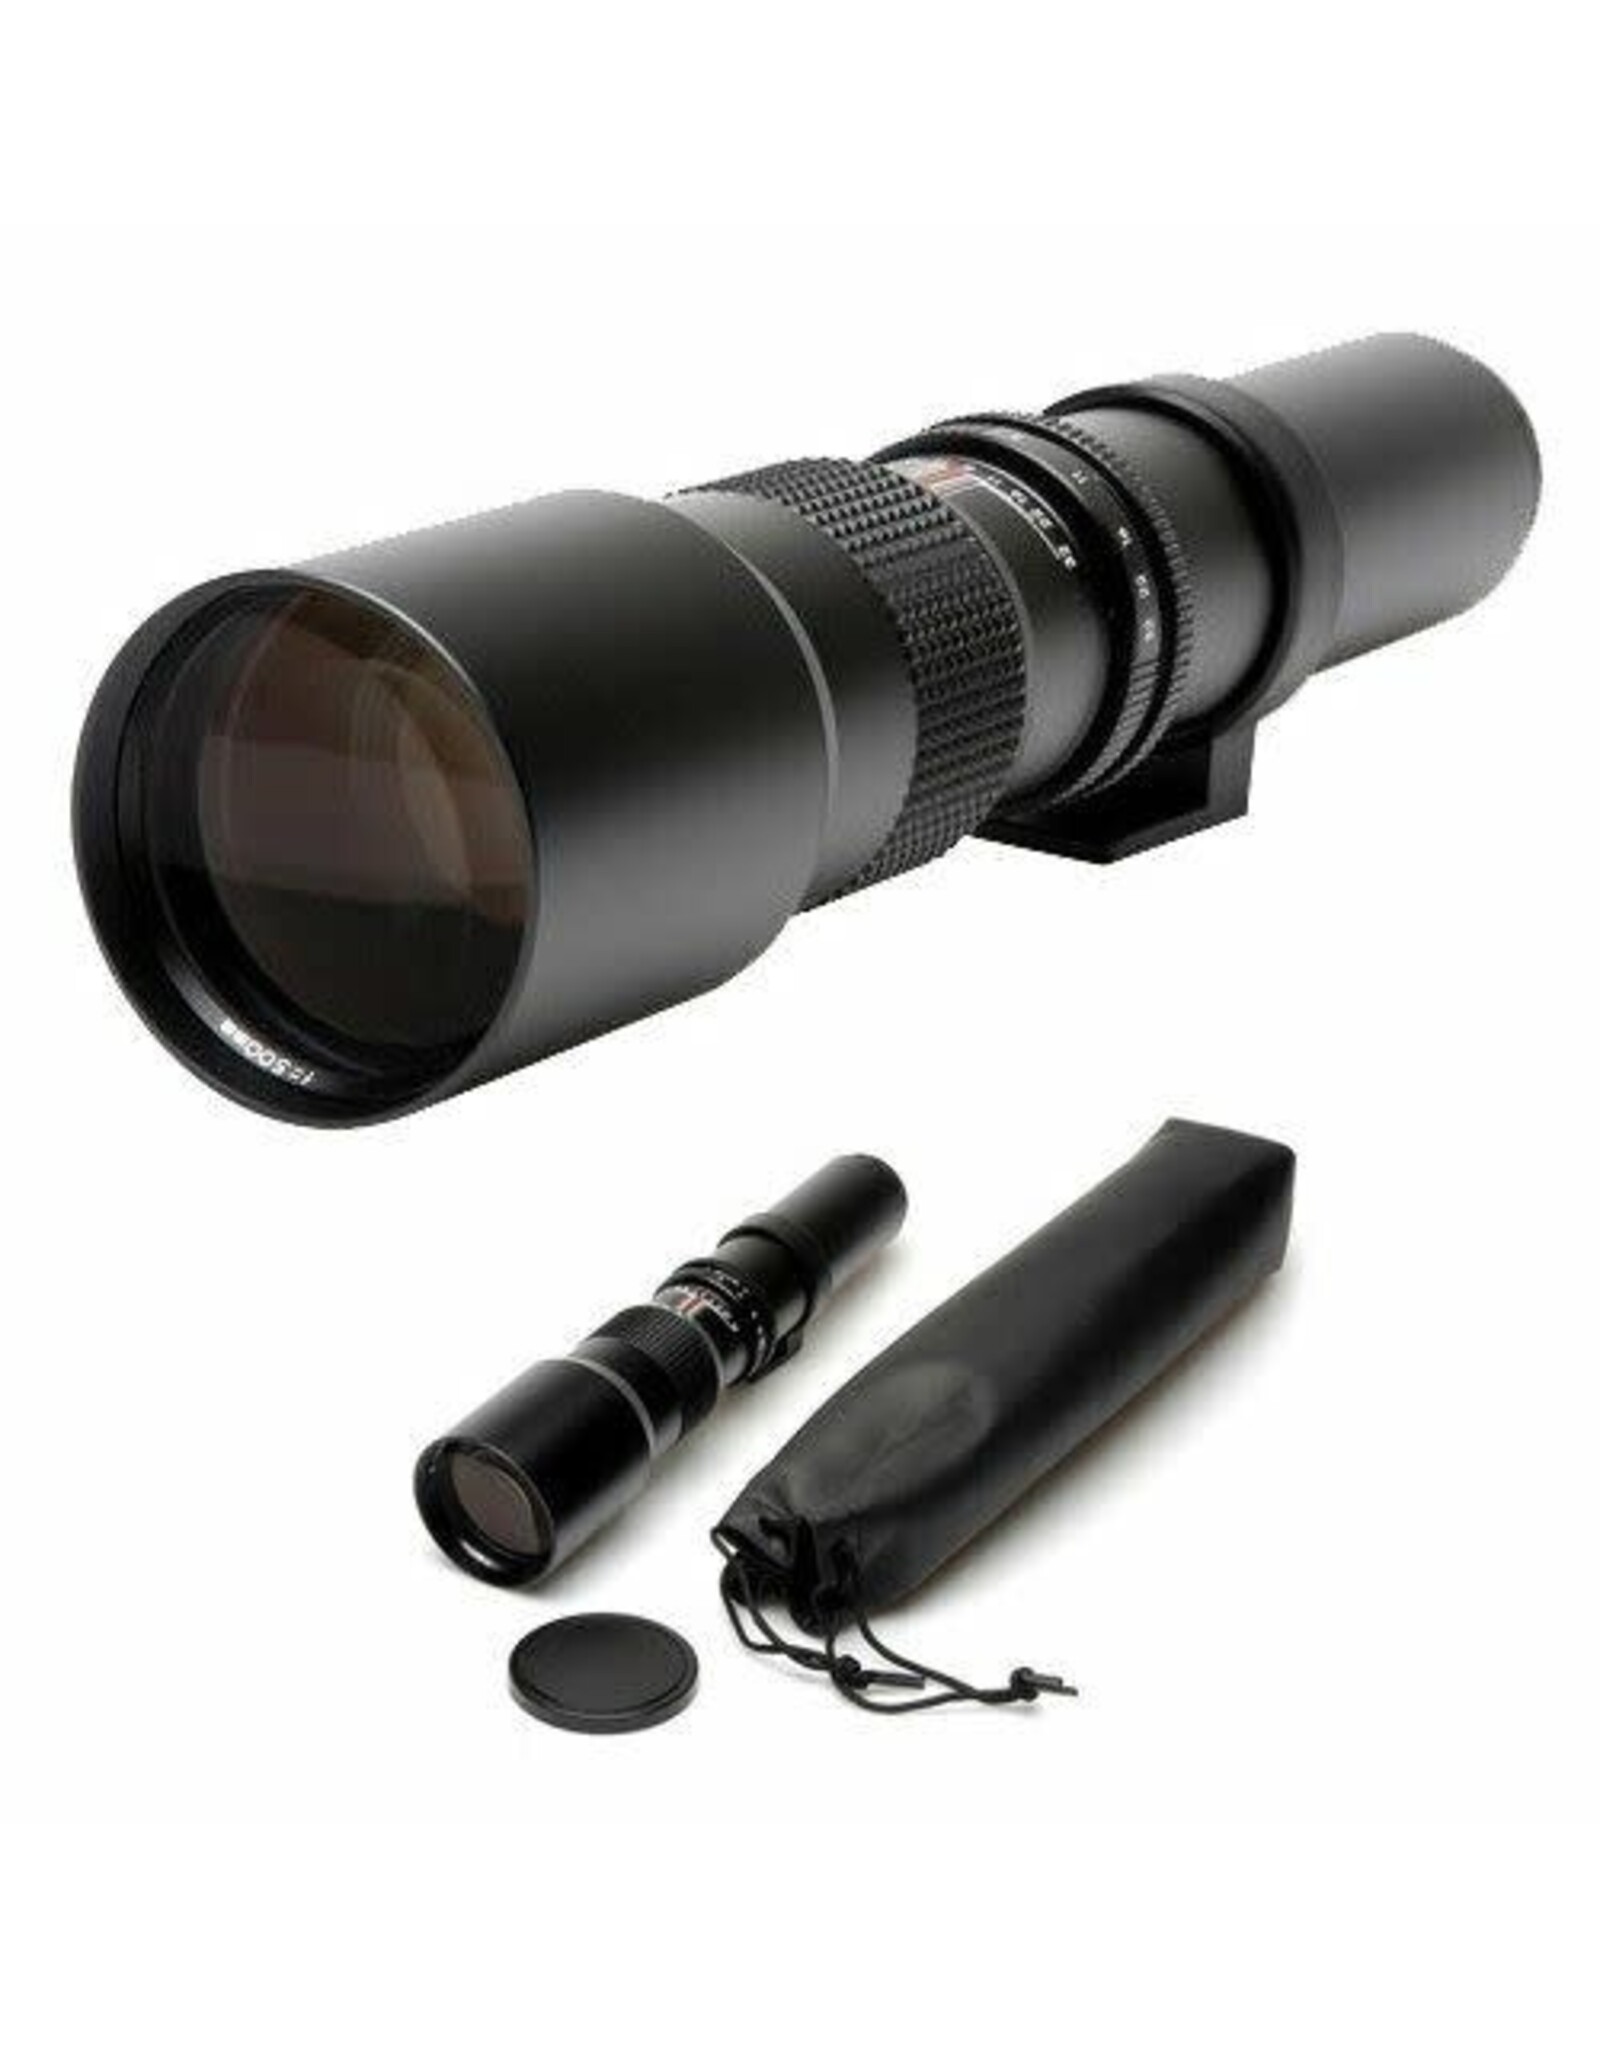 Samyang 500mm f/8.0 Telephoto Lens  (T Mount) Fits all Cameras with the appropriate adapter